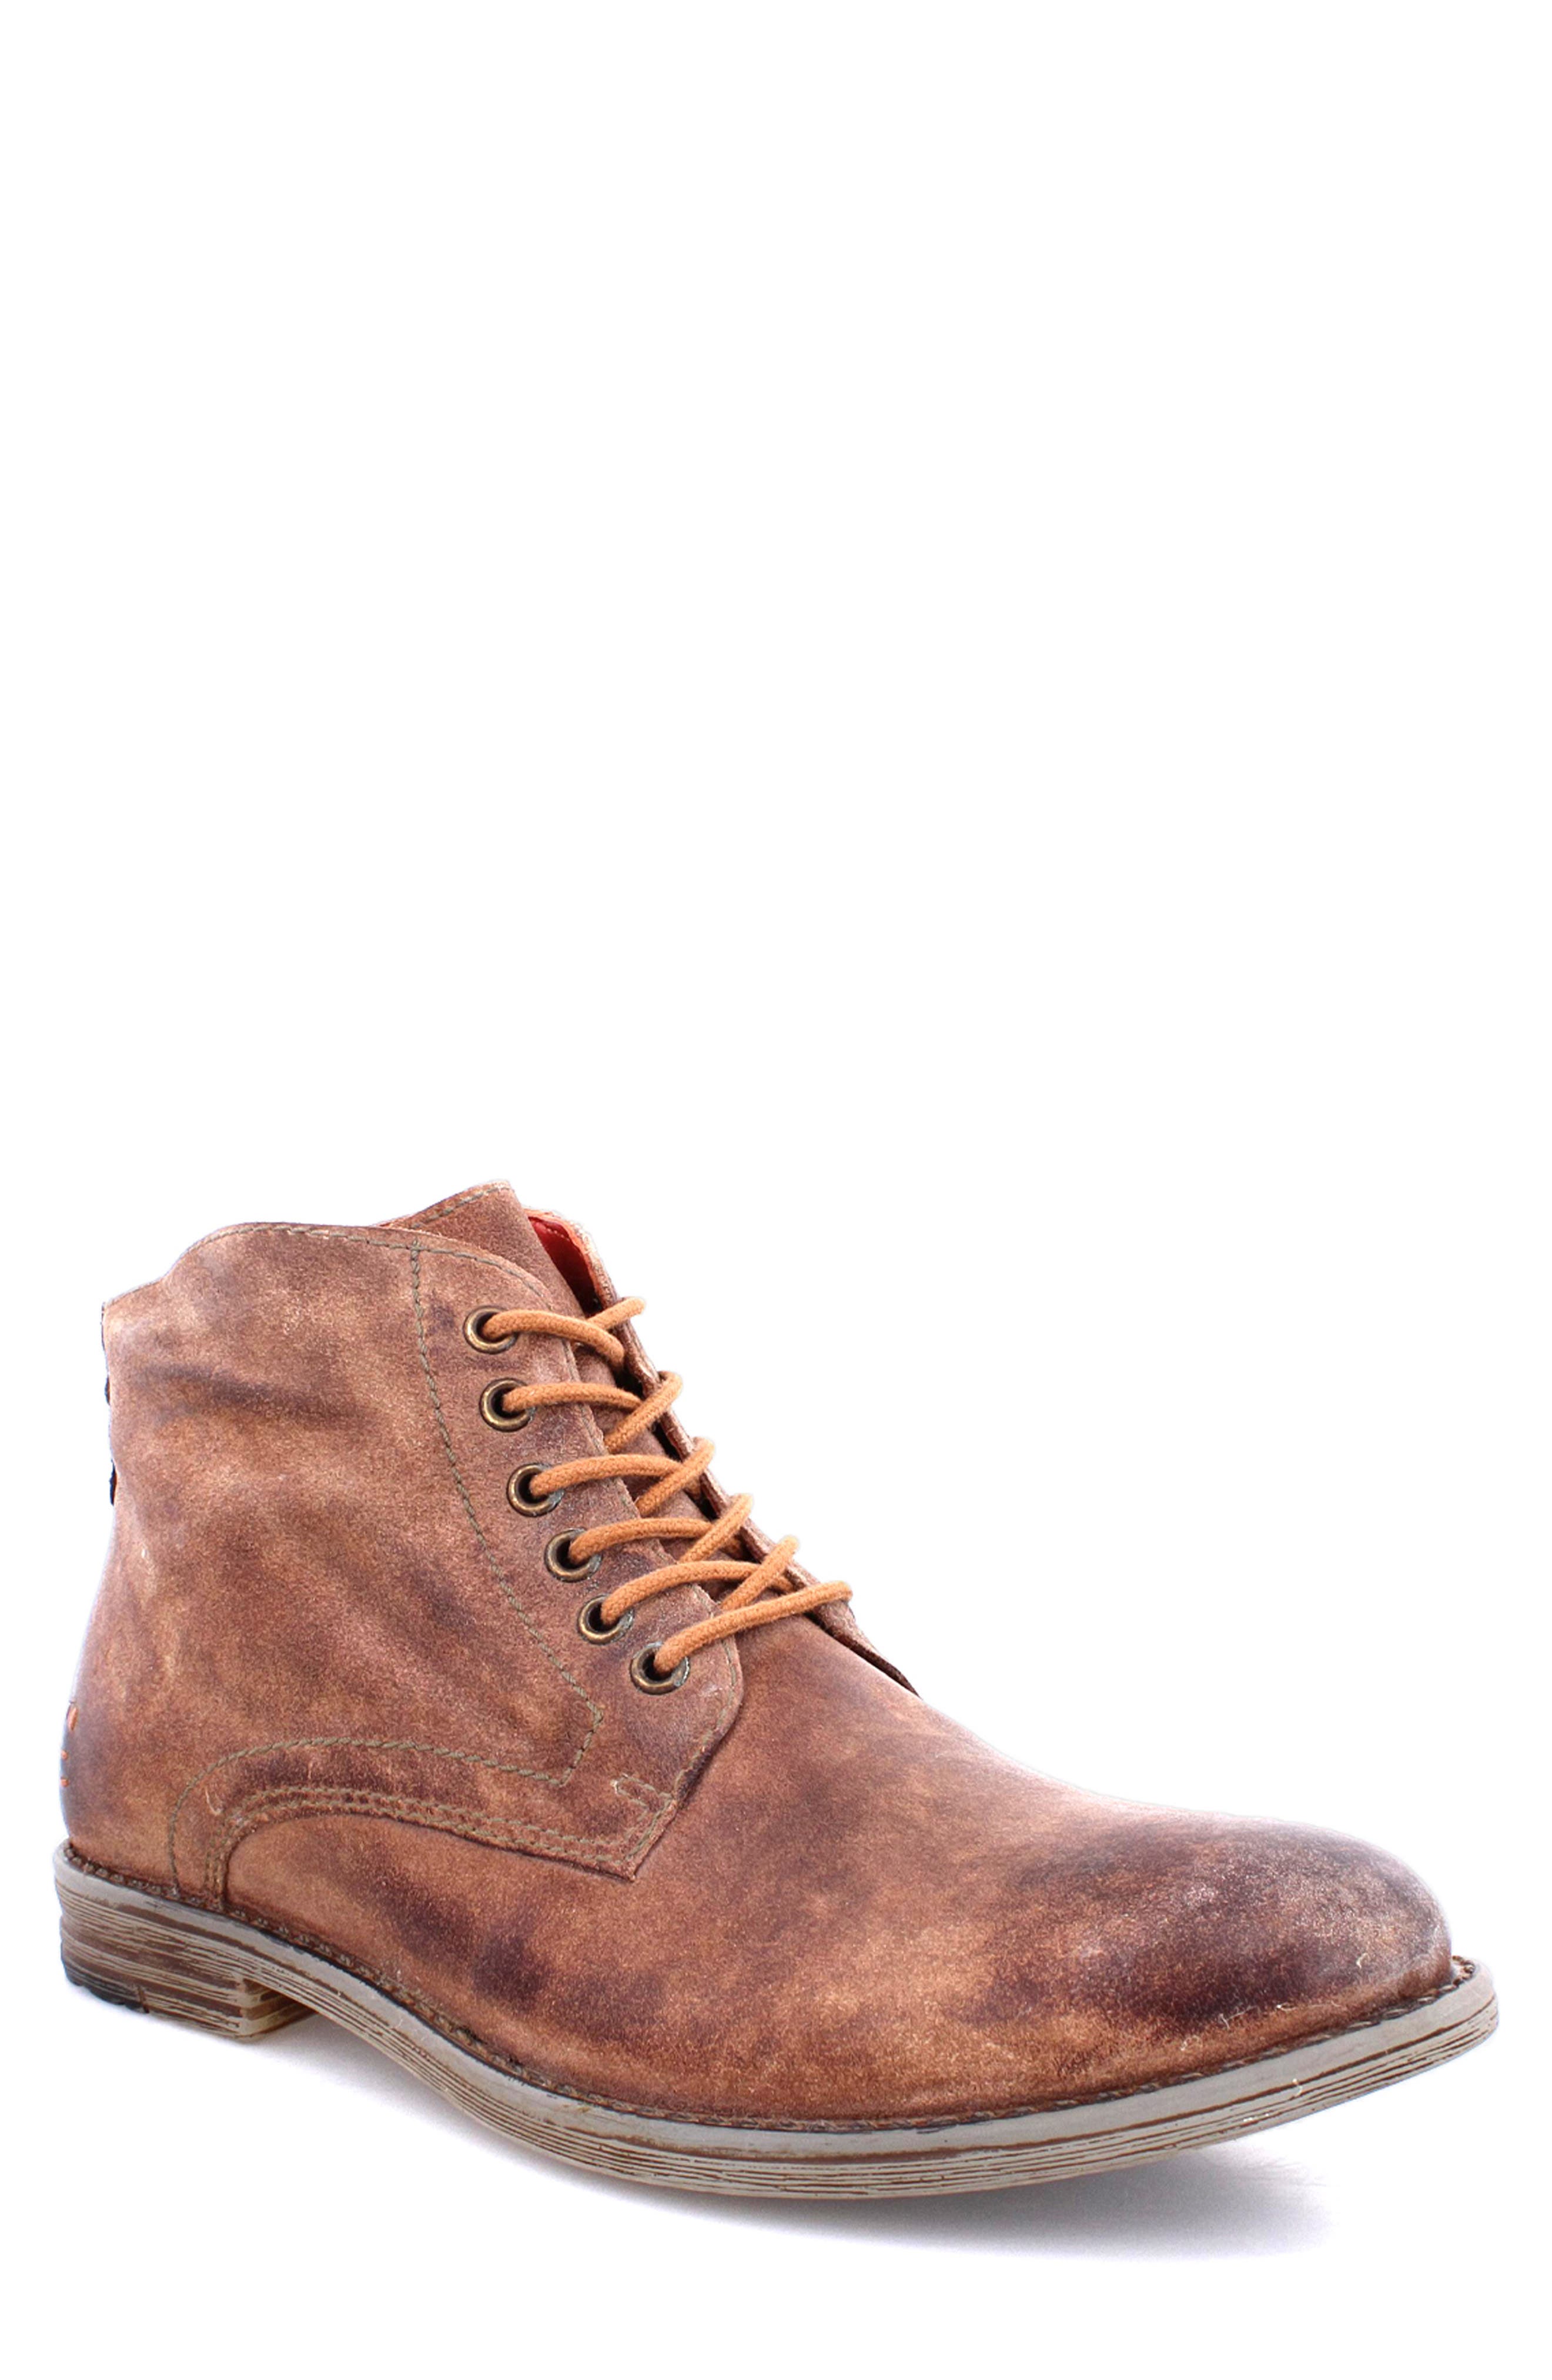 Proff Leather Lace-Up Boot Roan